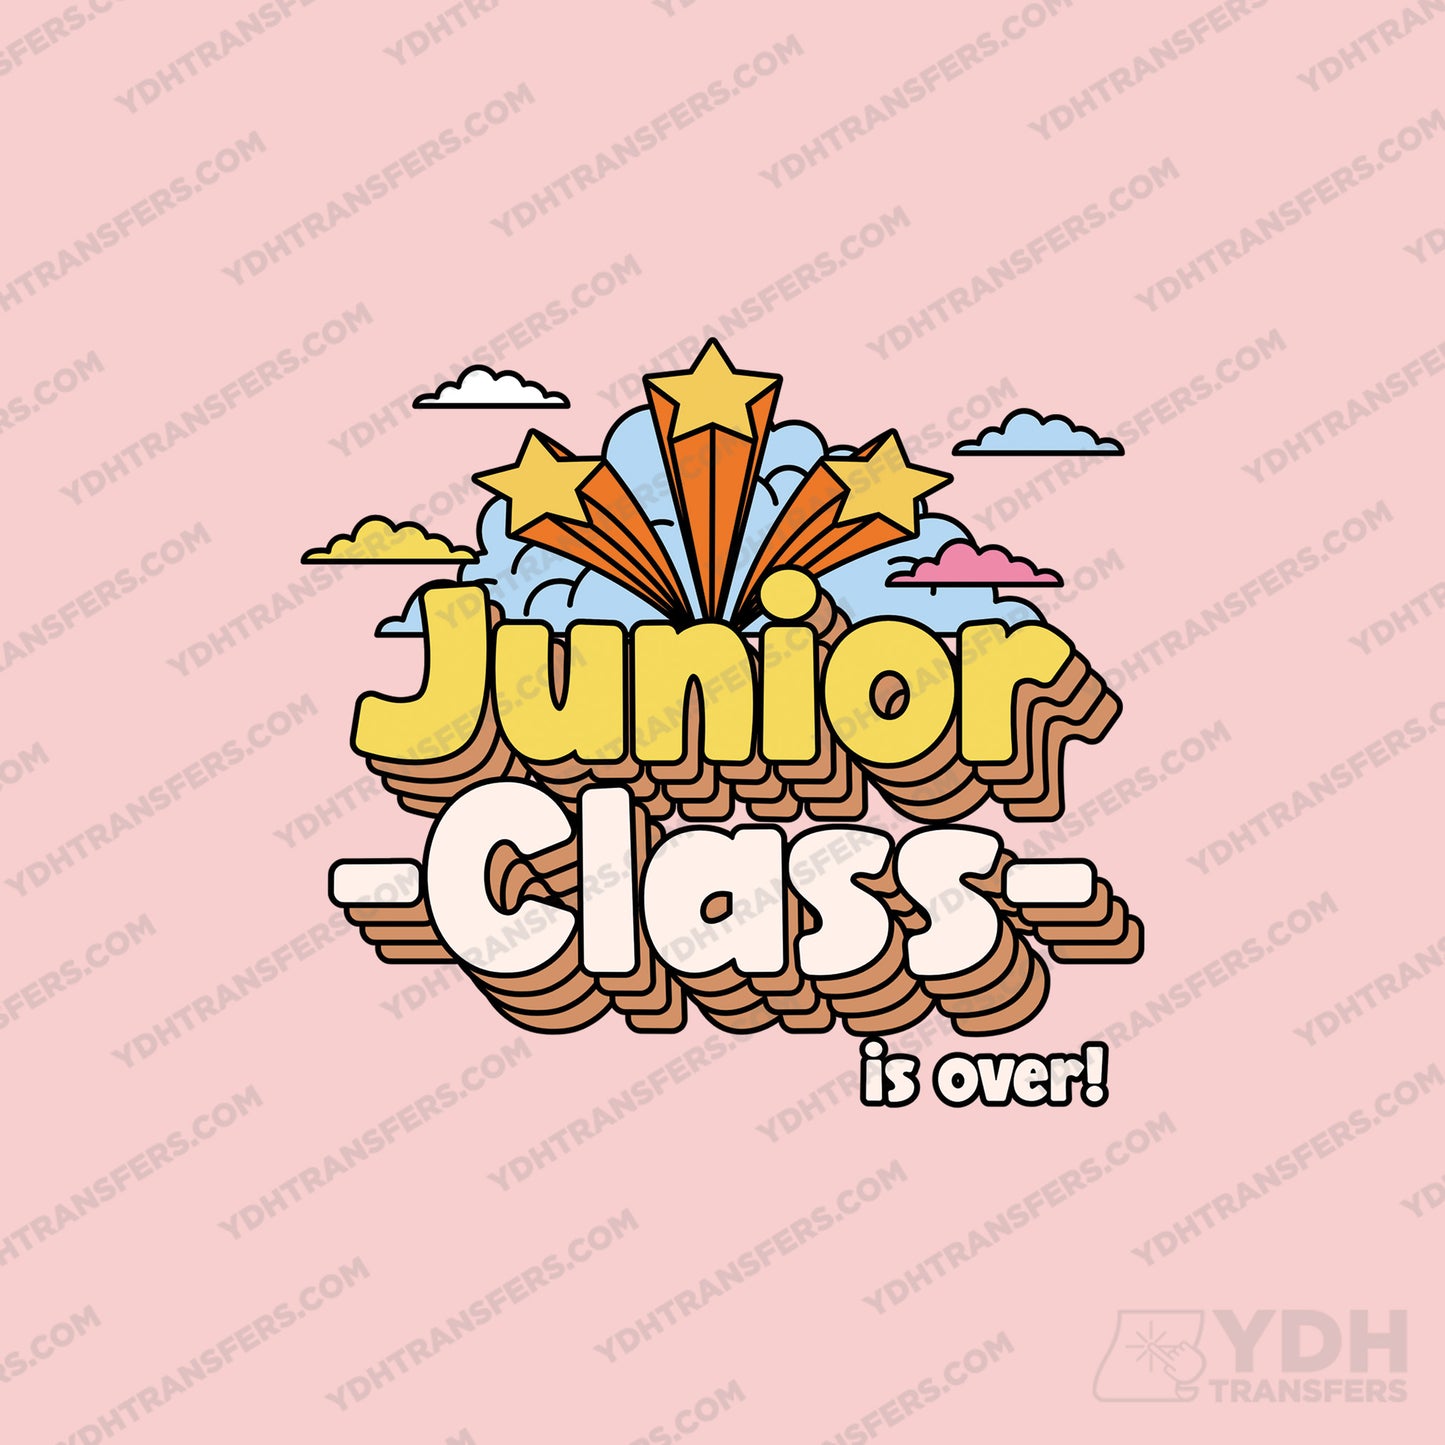 Junior Class is Over Full Color Transfer